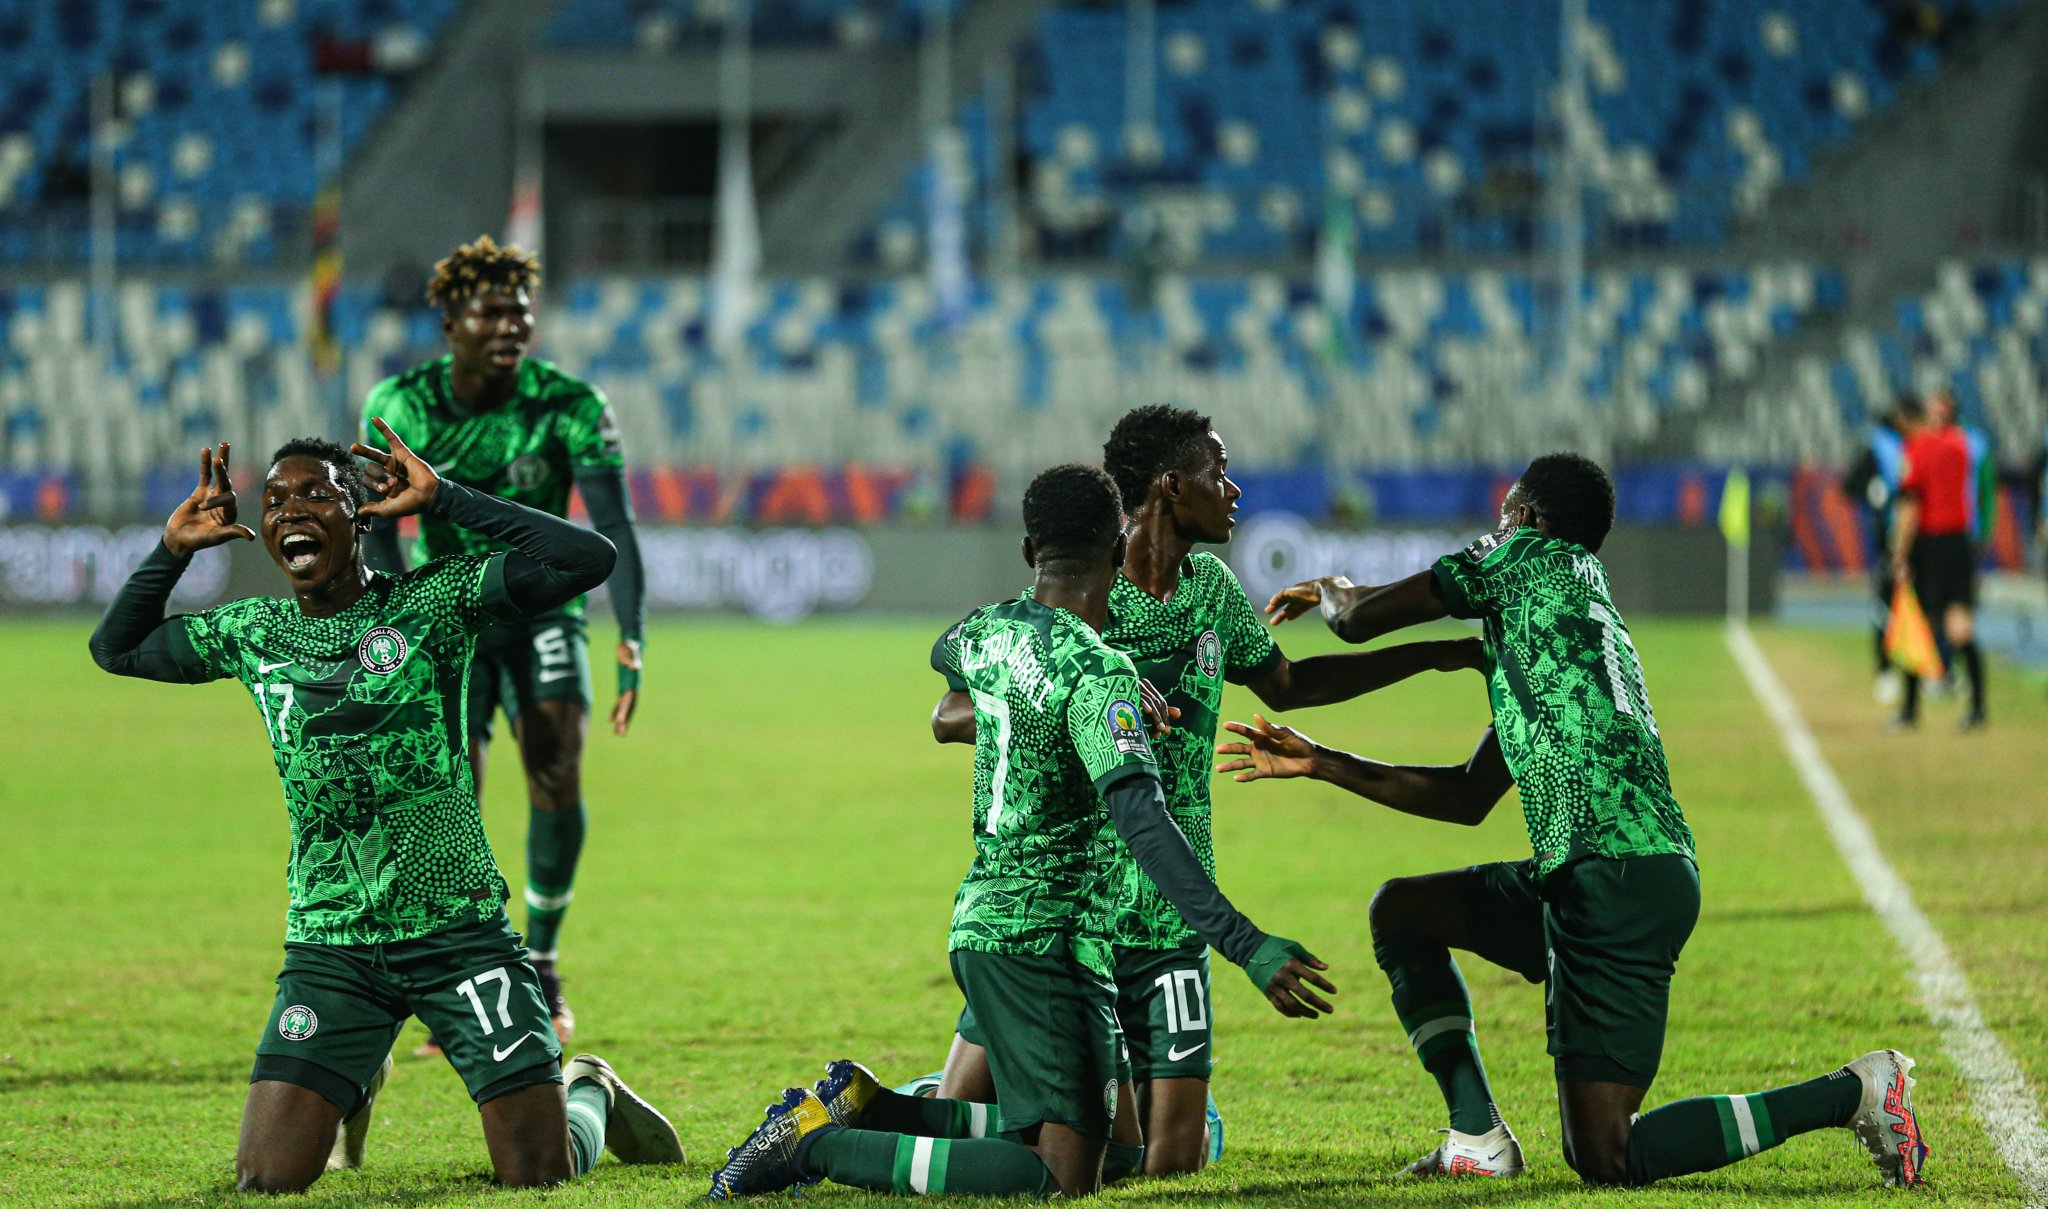 FIFA U20 World Cup Nigeria finish 3rd in their group